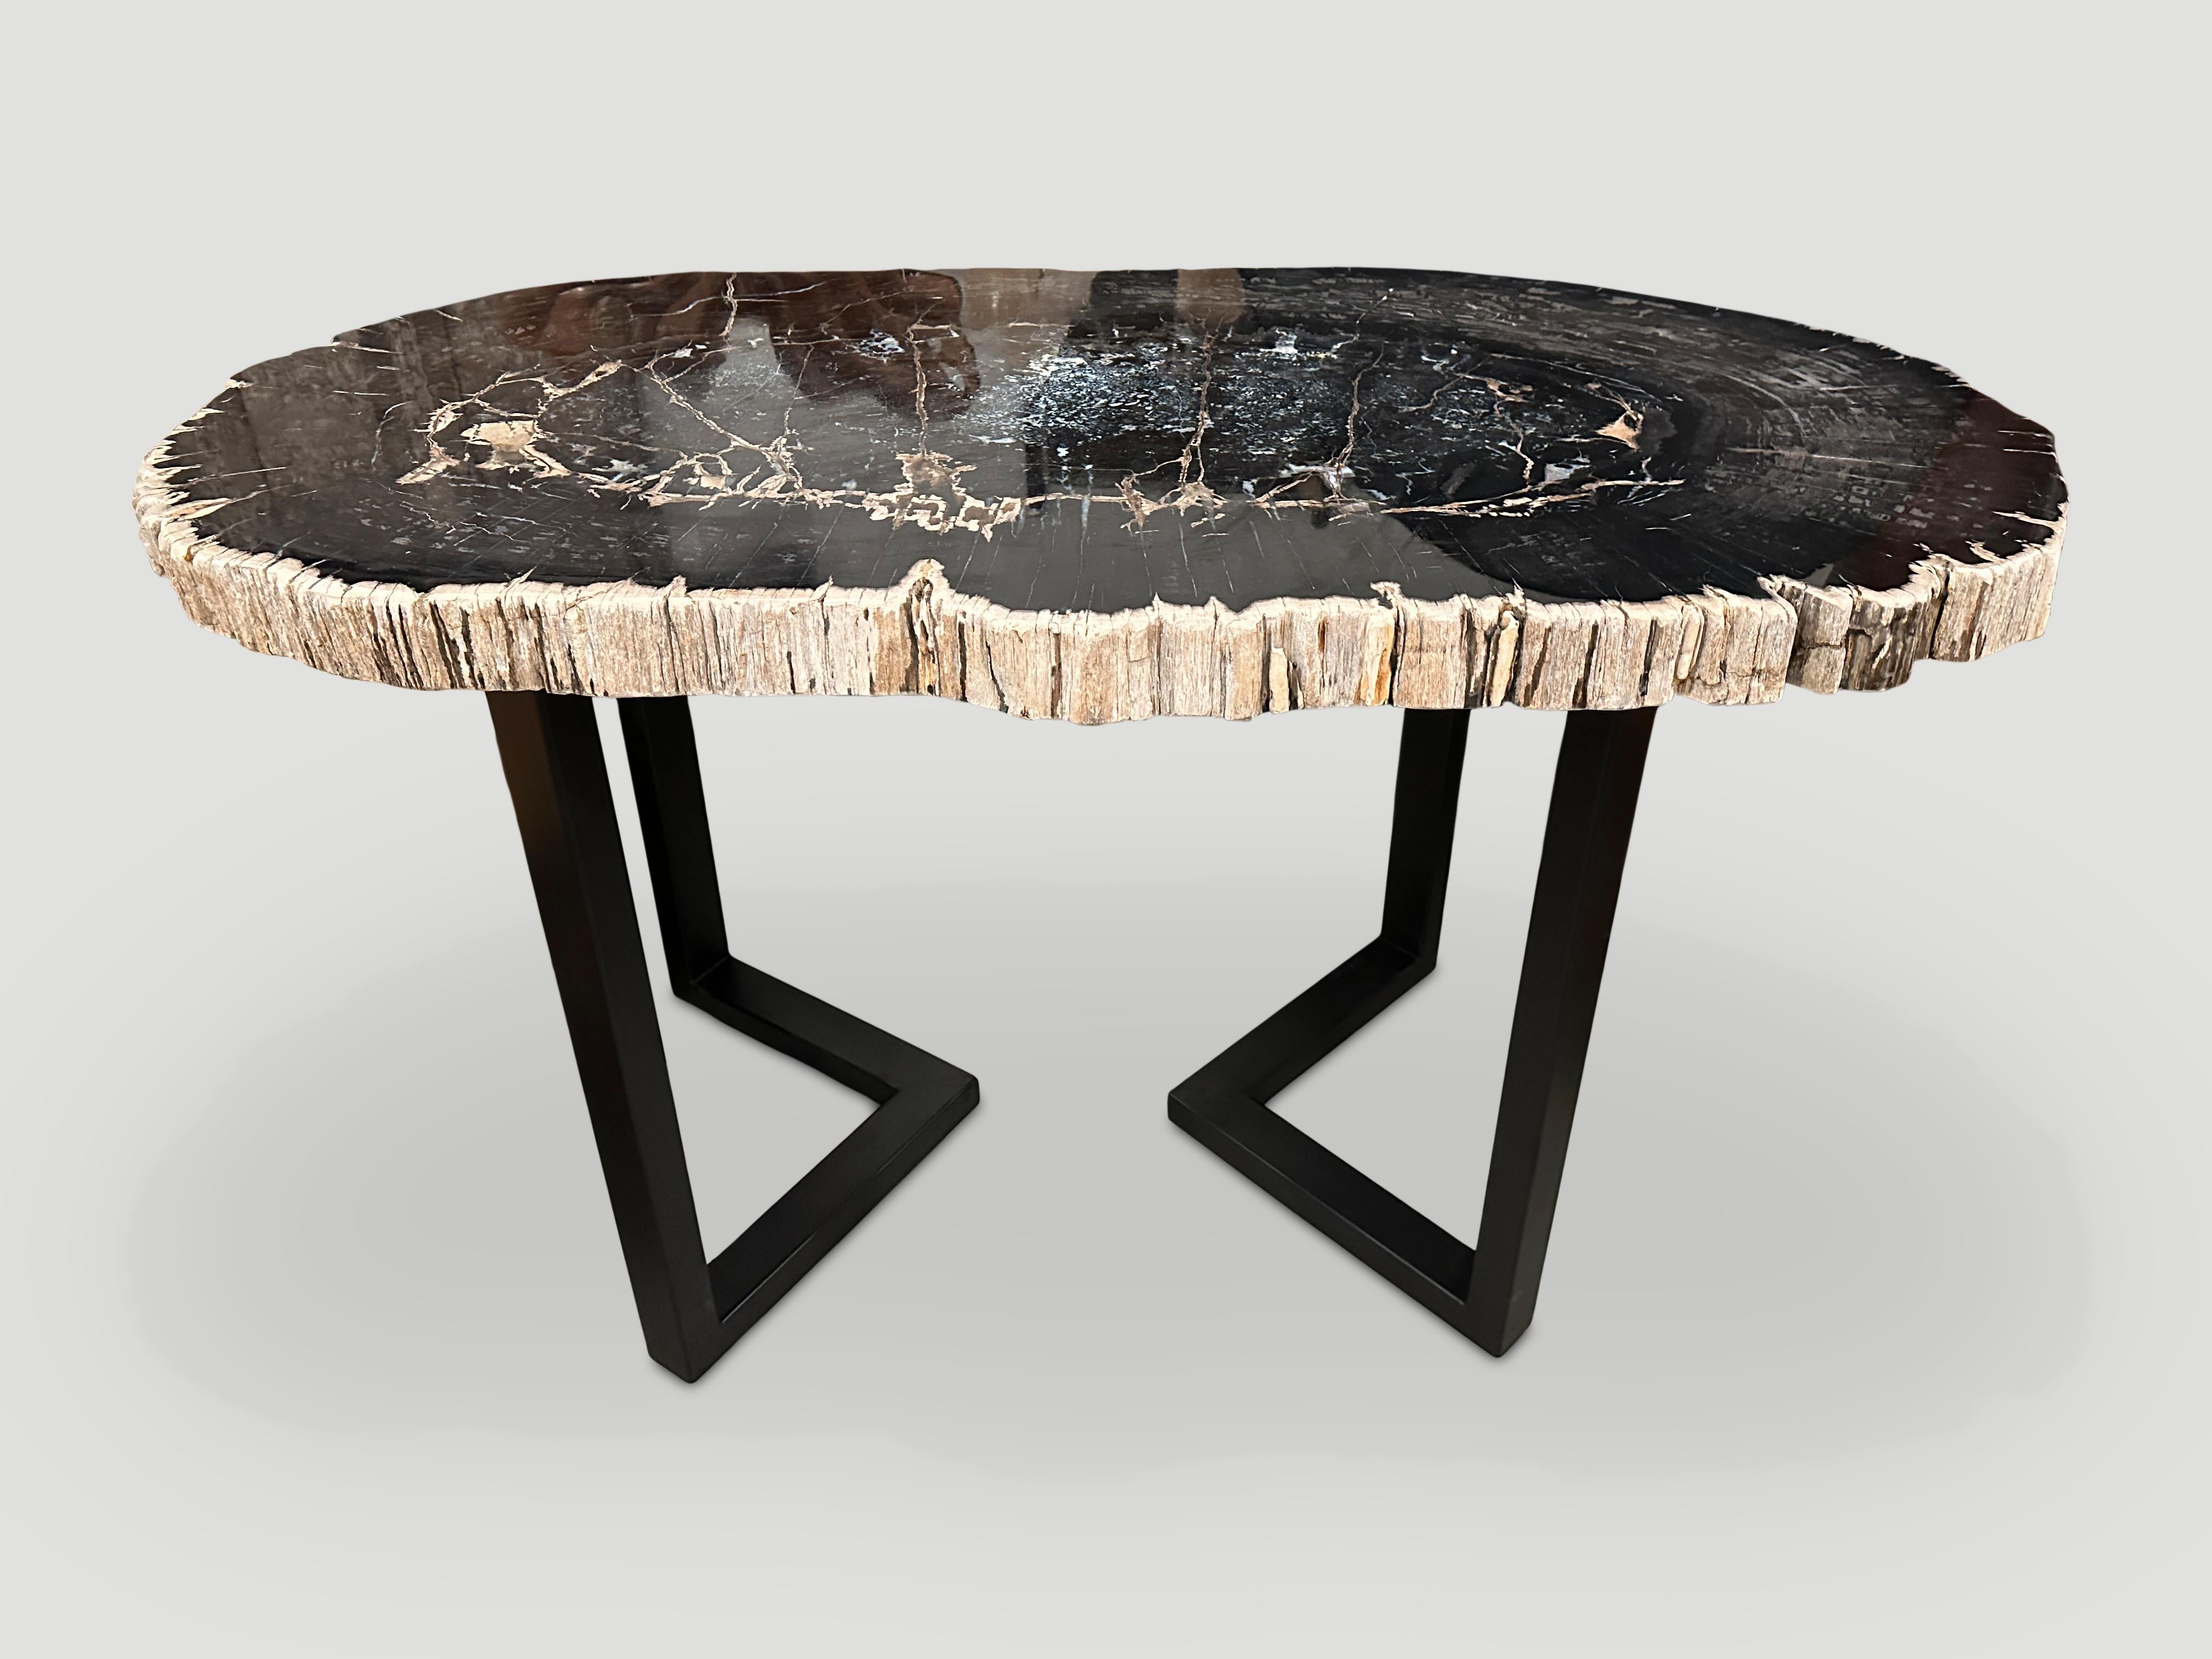 Andrianna Shamaris Magnificent Large Petrified Wood Table In Excellent Condition For Sale In New York, NY